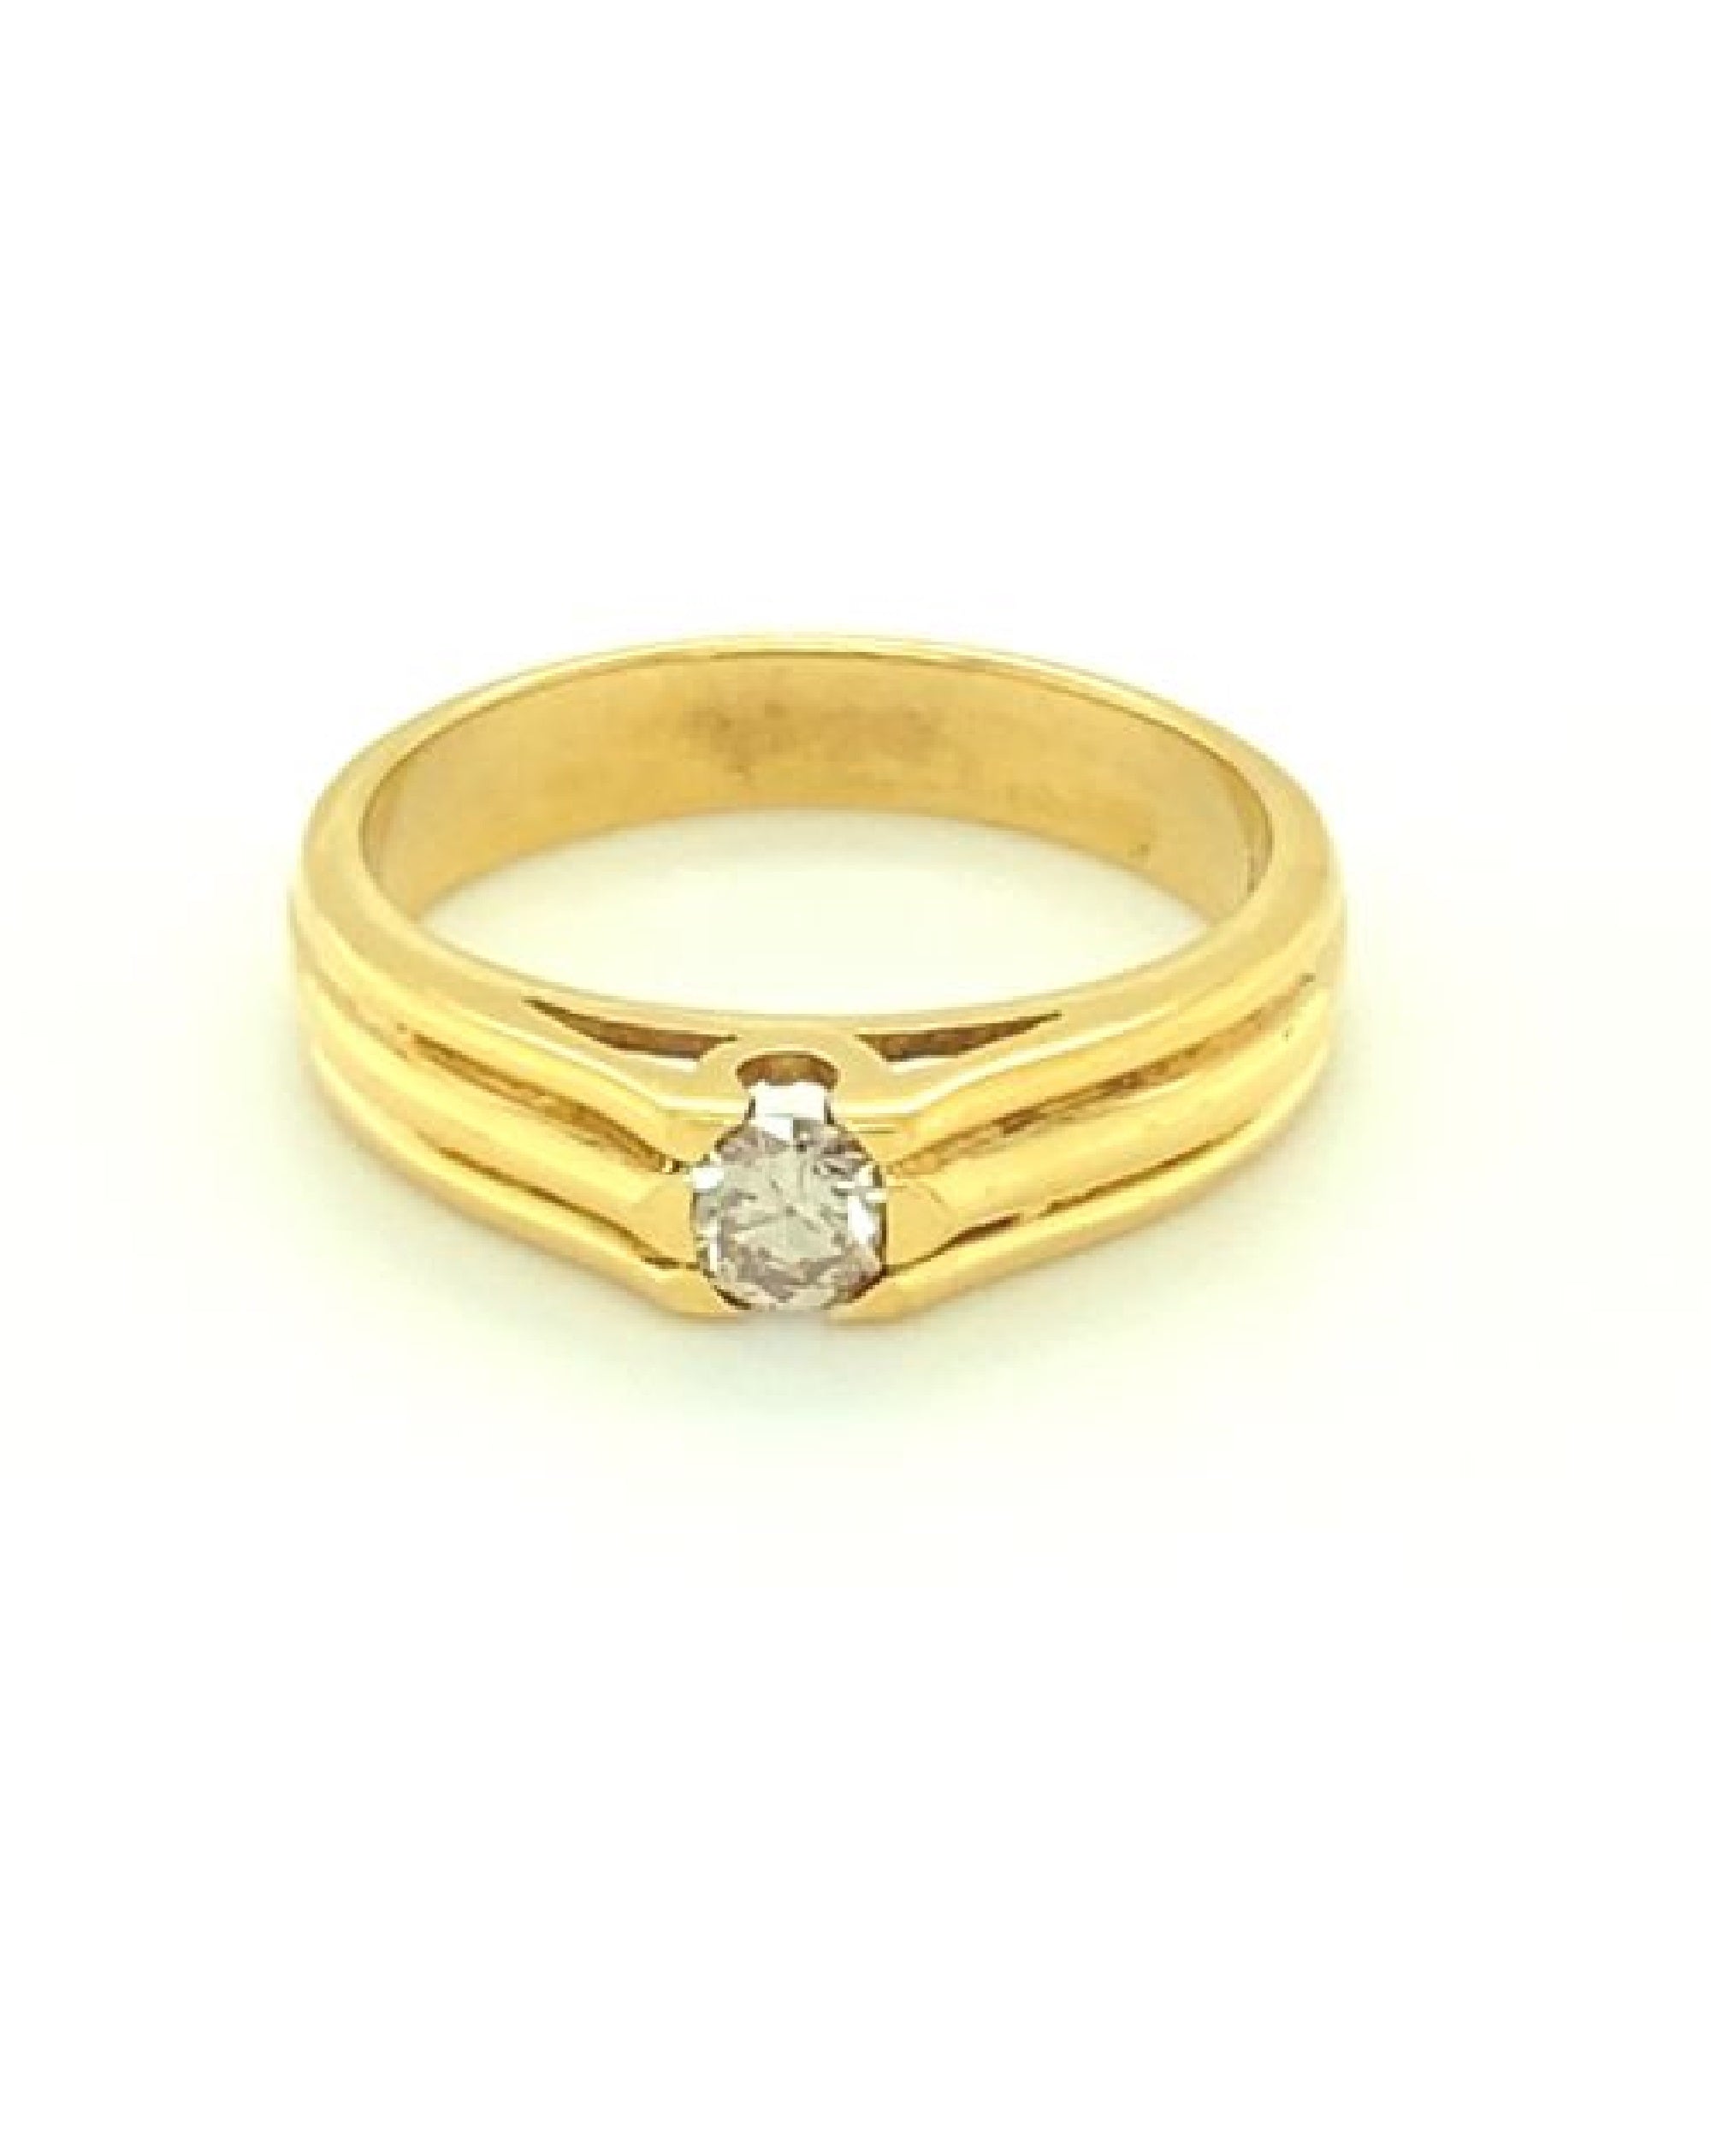 Buy quality Solitaire Diamond Ring for Everyday Wear in 18k Yellow Gold -  1.810 grams - 16 cents VVS EF - 0LR66 in Pune